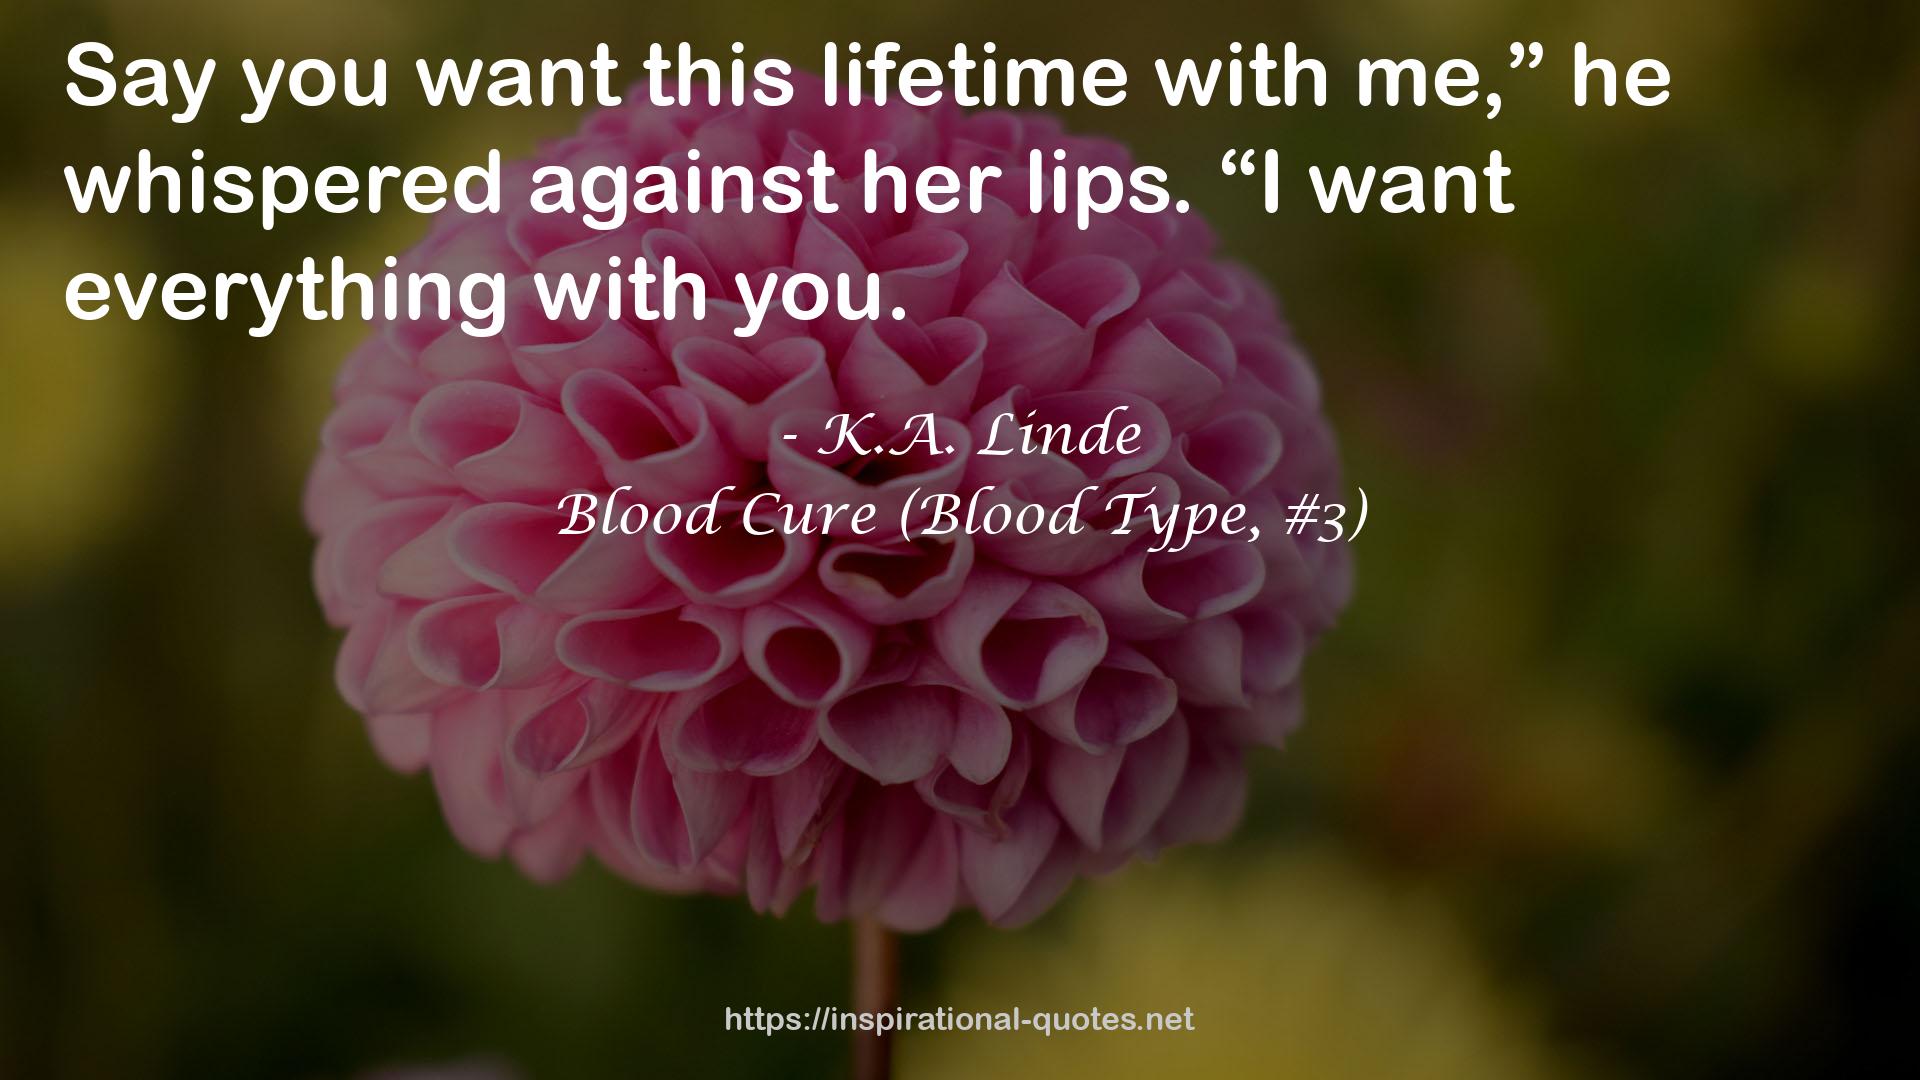 Blood Cure (Blood Type, #3) QUOTES